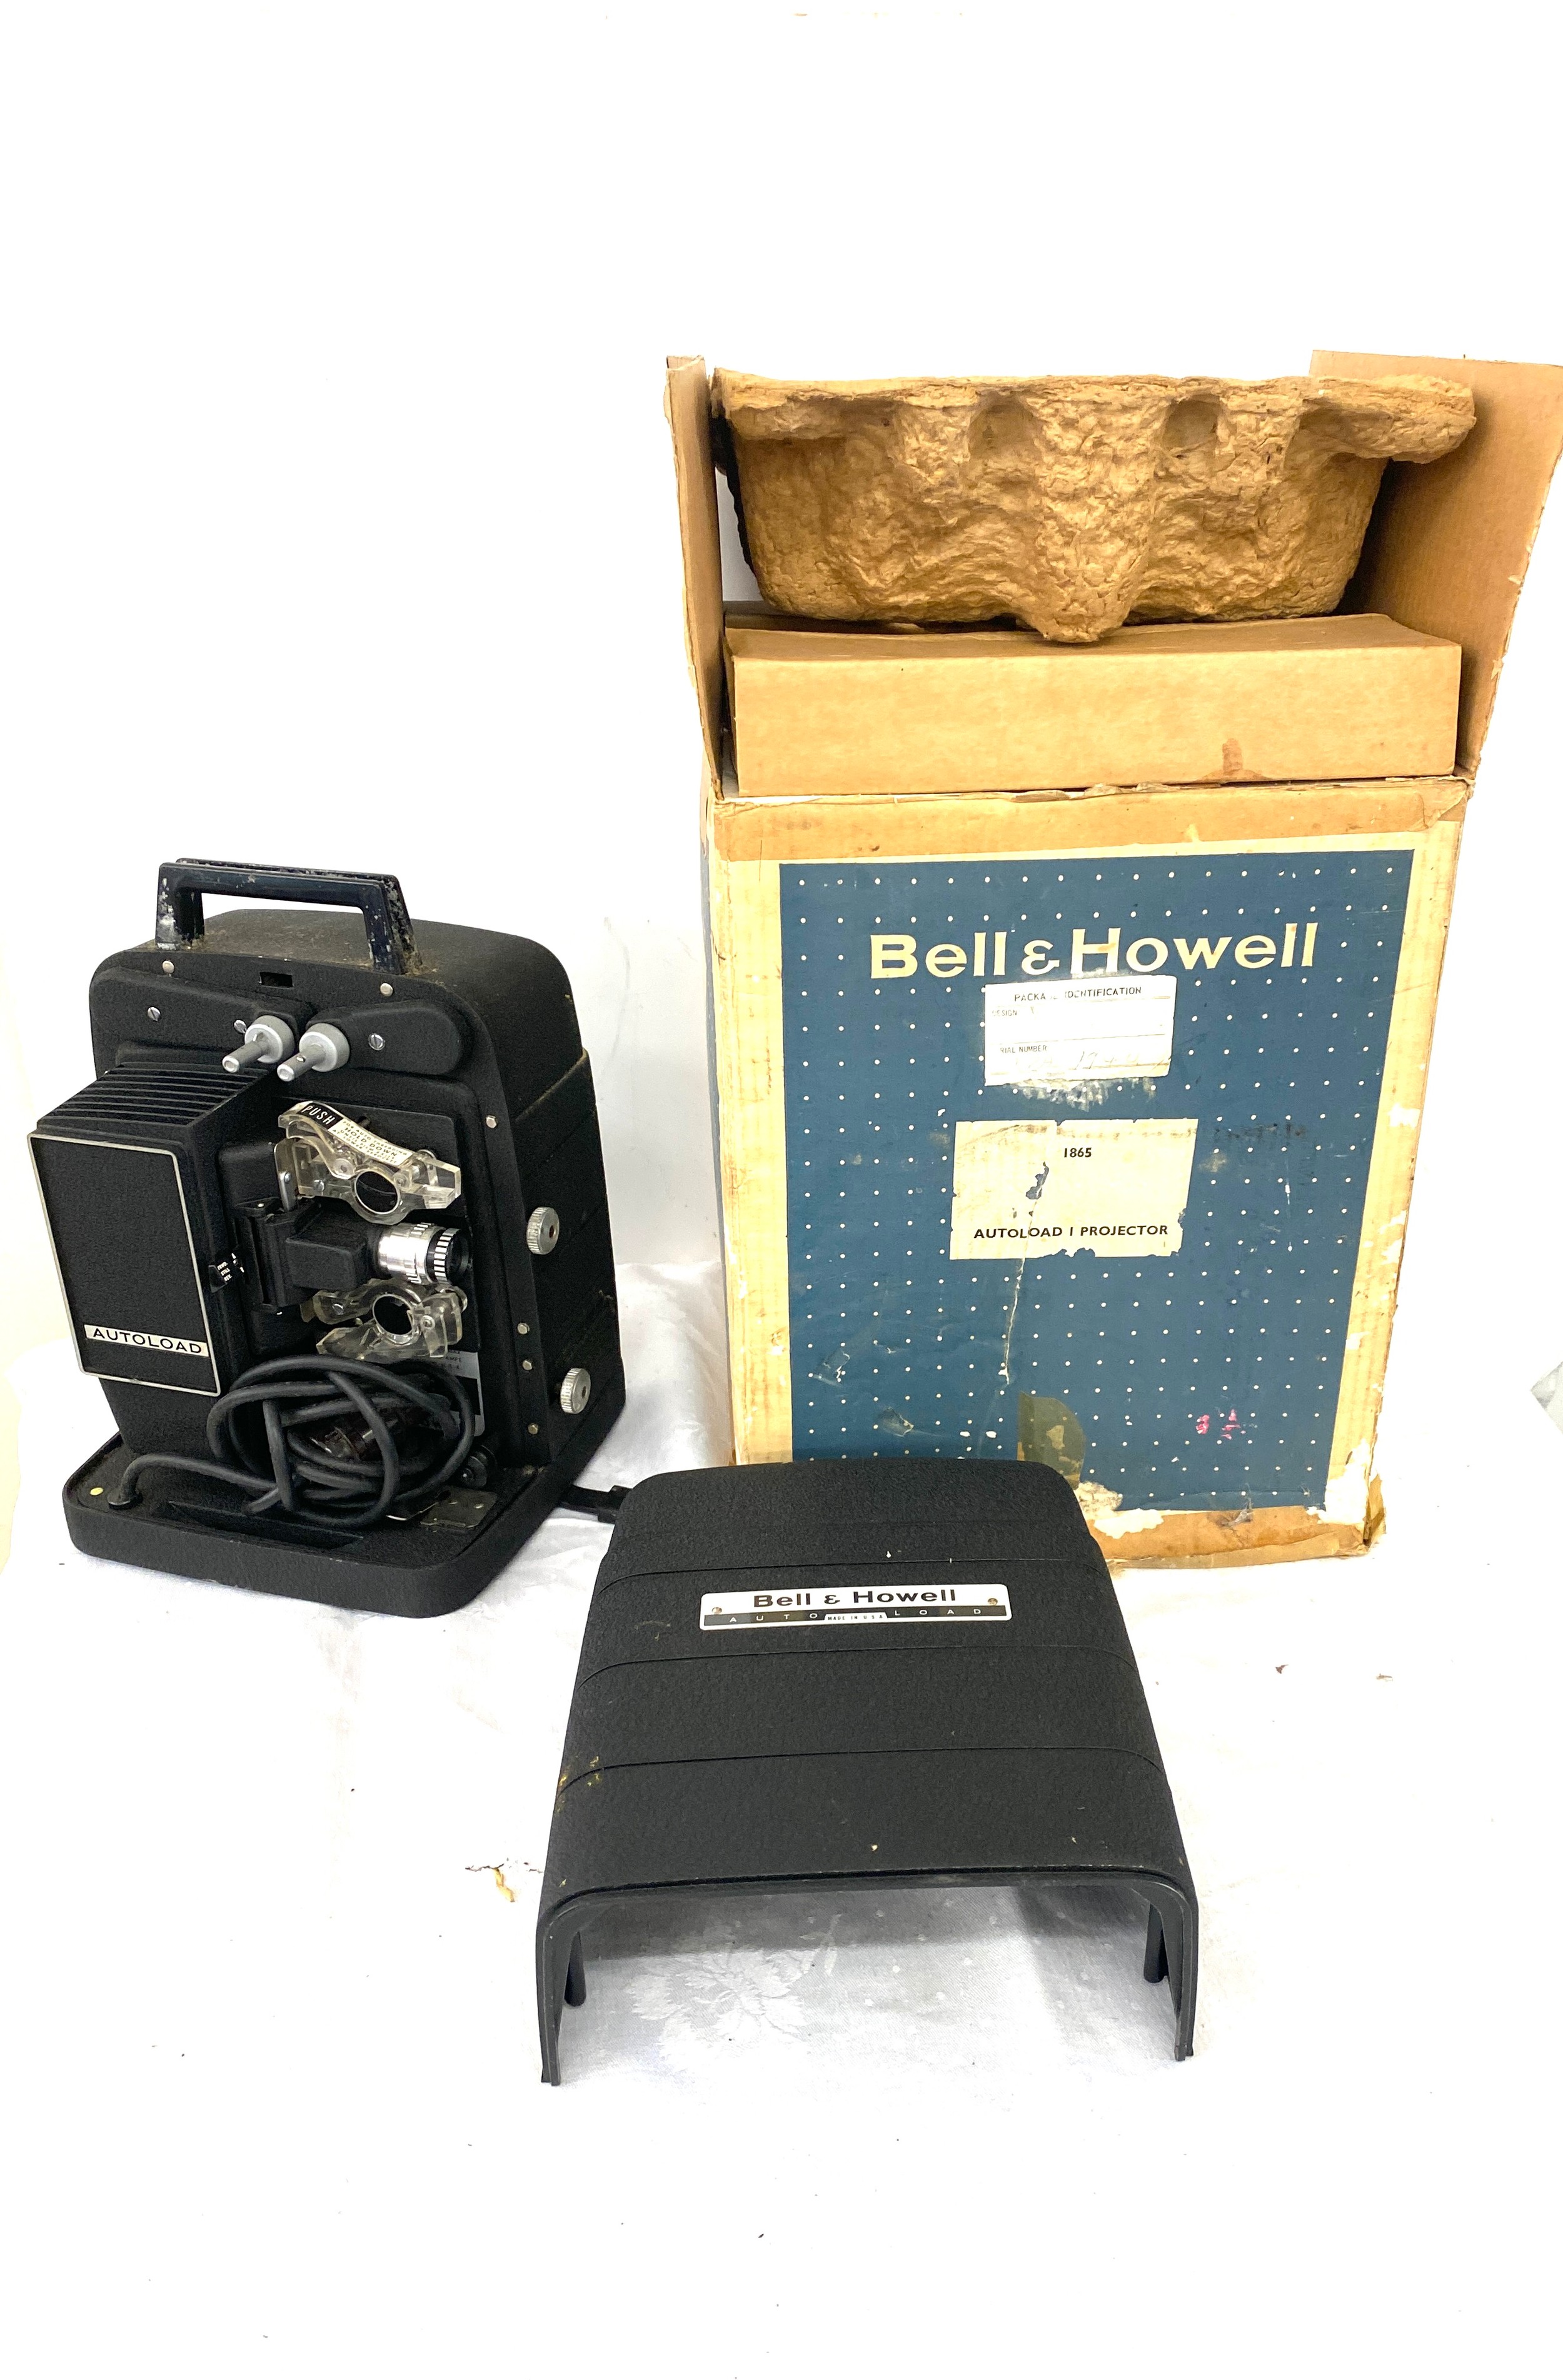 Bell and Howell auto load cased projector, untested